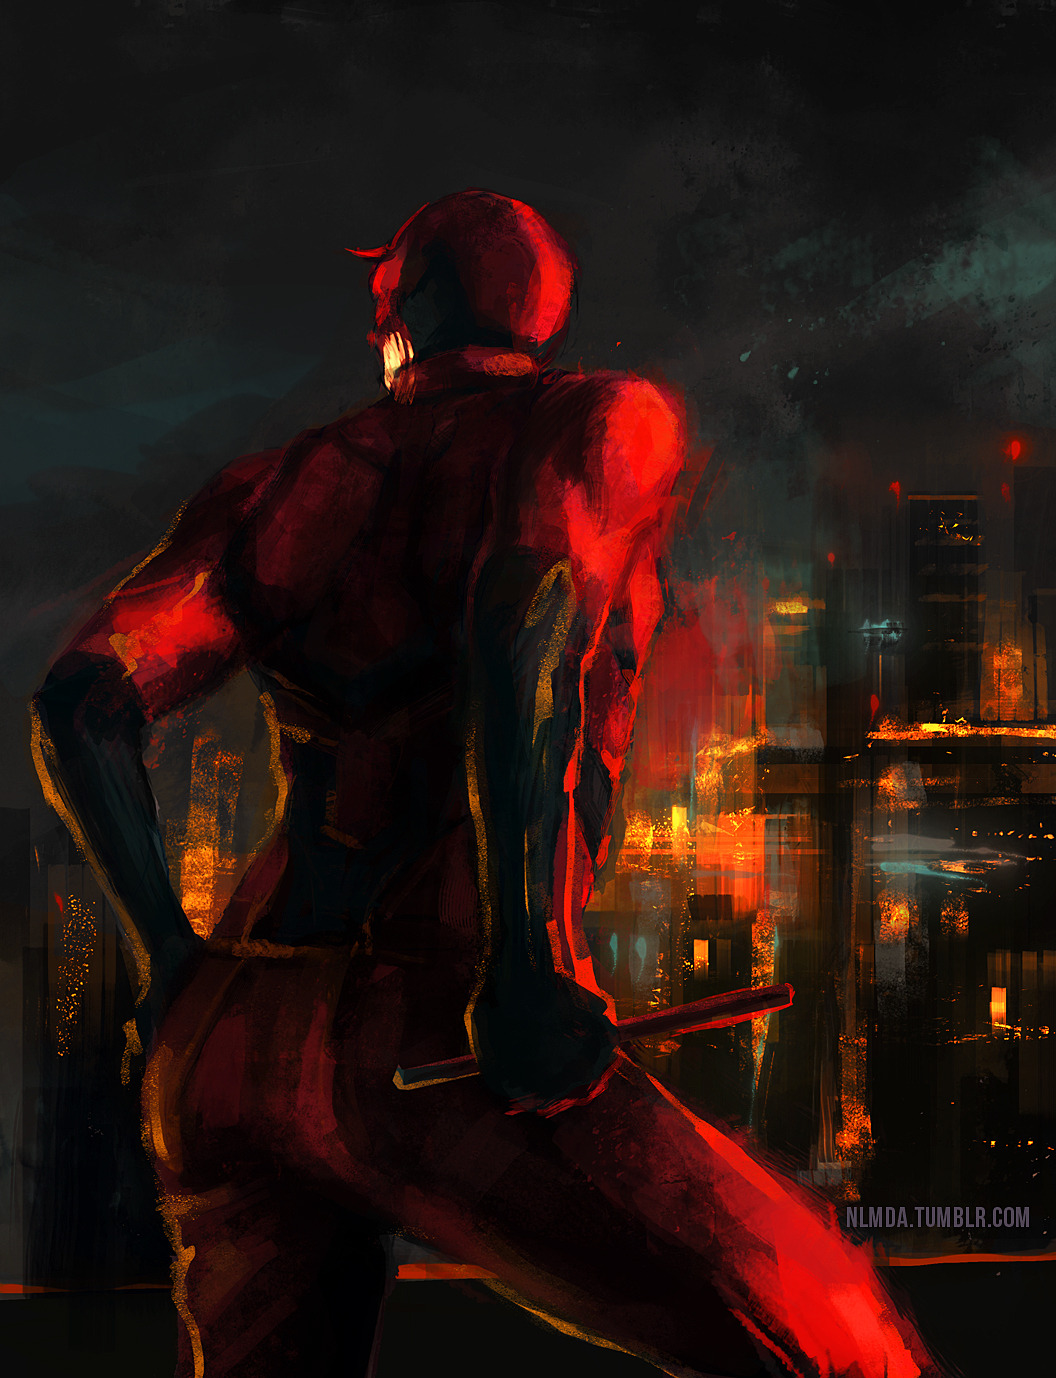 nlmda:  Oh look, Daredevil got new outfit this season :D  I still miss the black